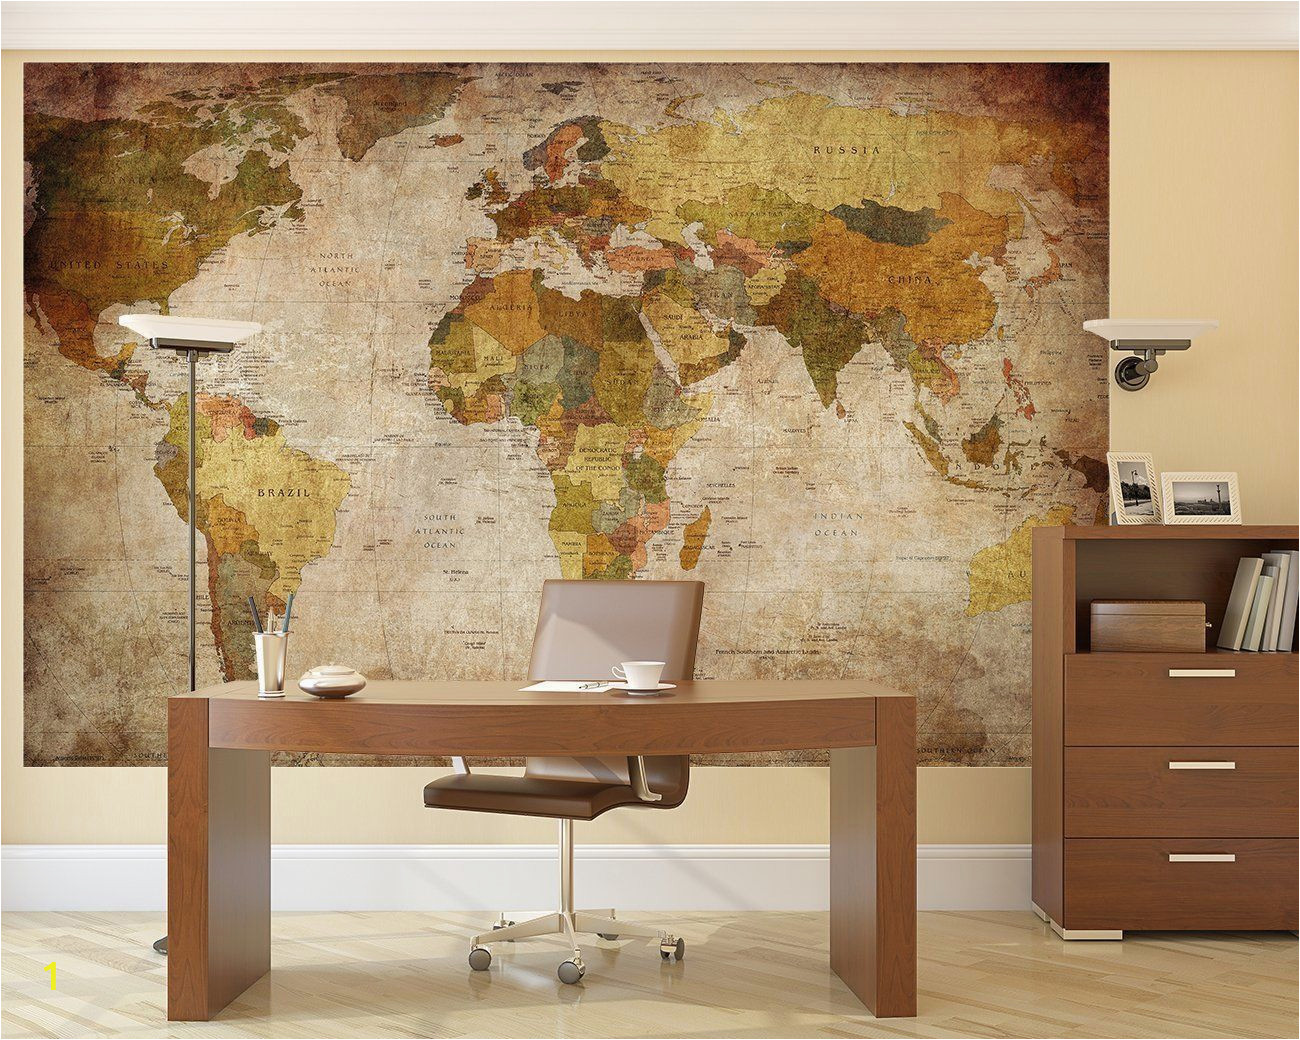 Vintage Map Wall Mural Details About Vintage World Map Wallpaper Mural Giant